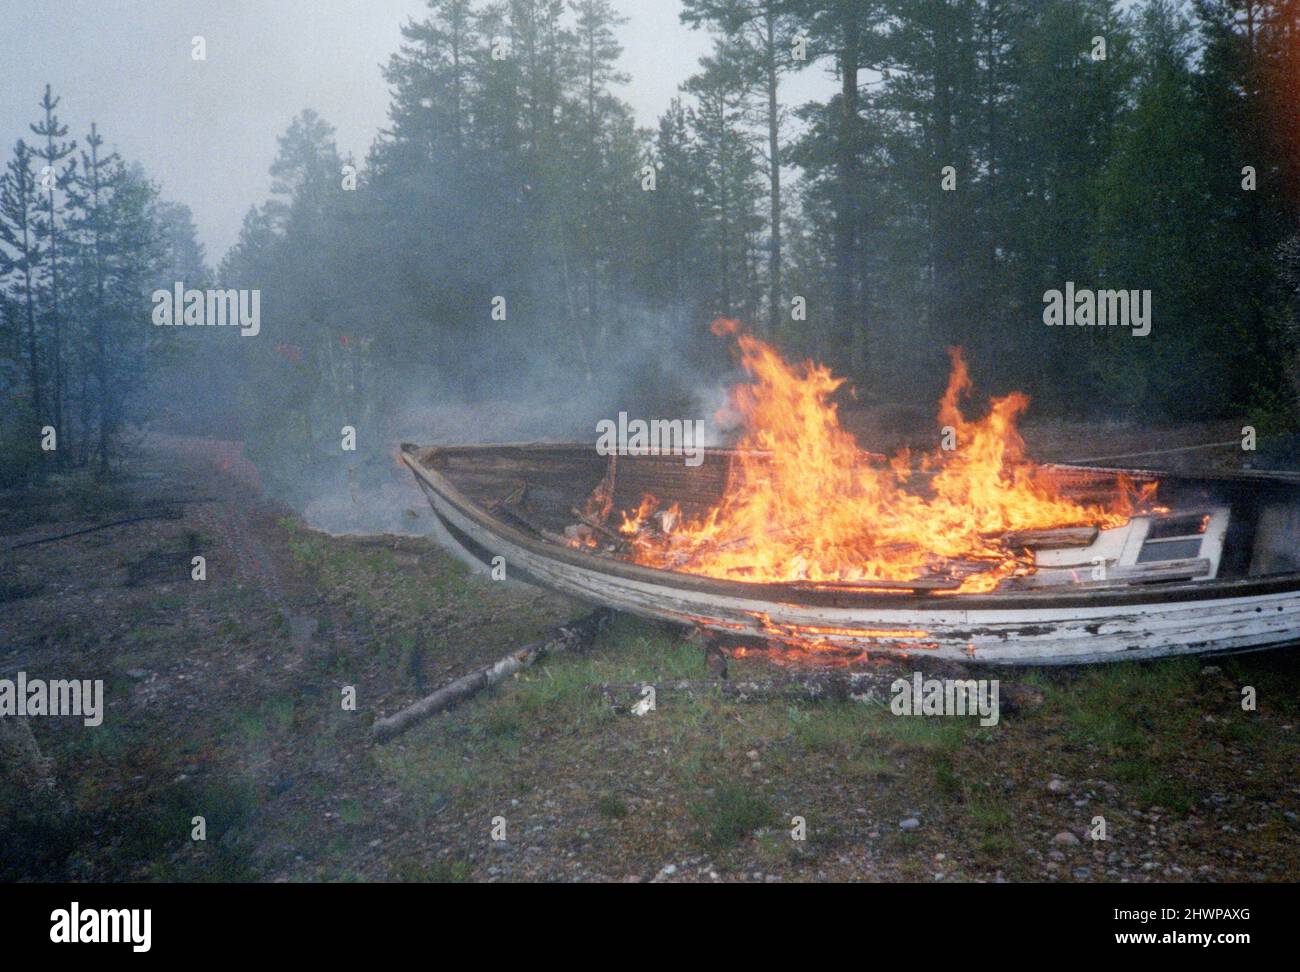 Old dilapidated wooden rowing boat burning on fire in forest, Sweden Stock Photo